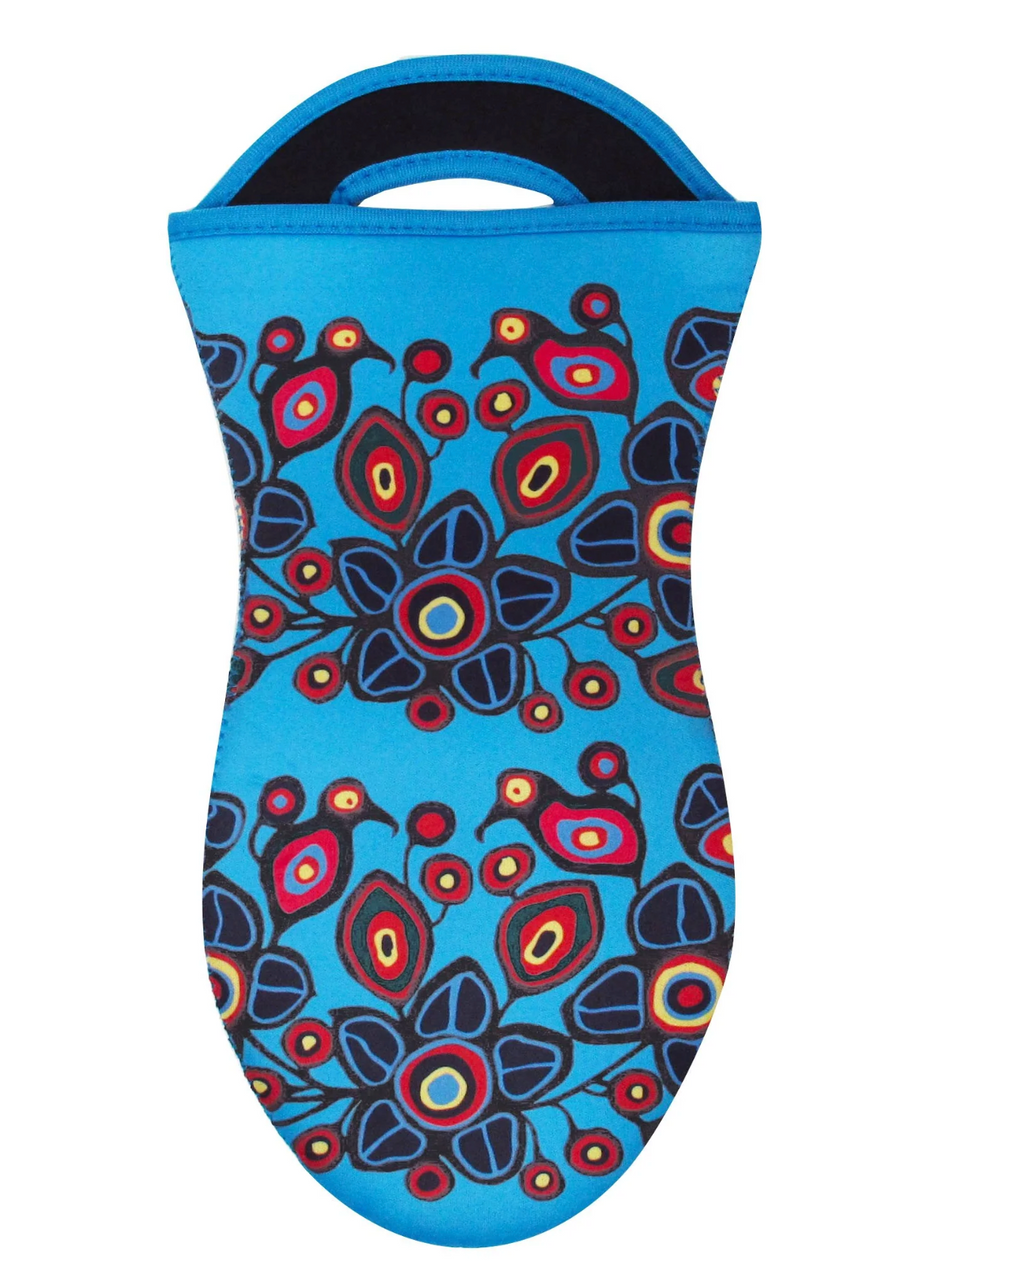 Norval Morrisseau Flowers and Birds Oven Mitt